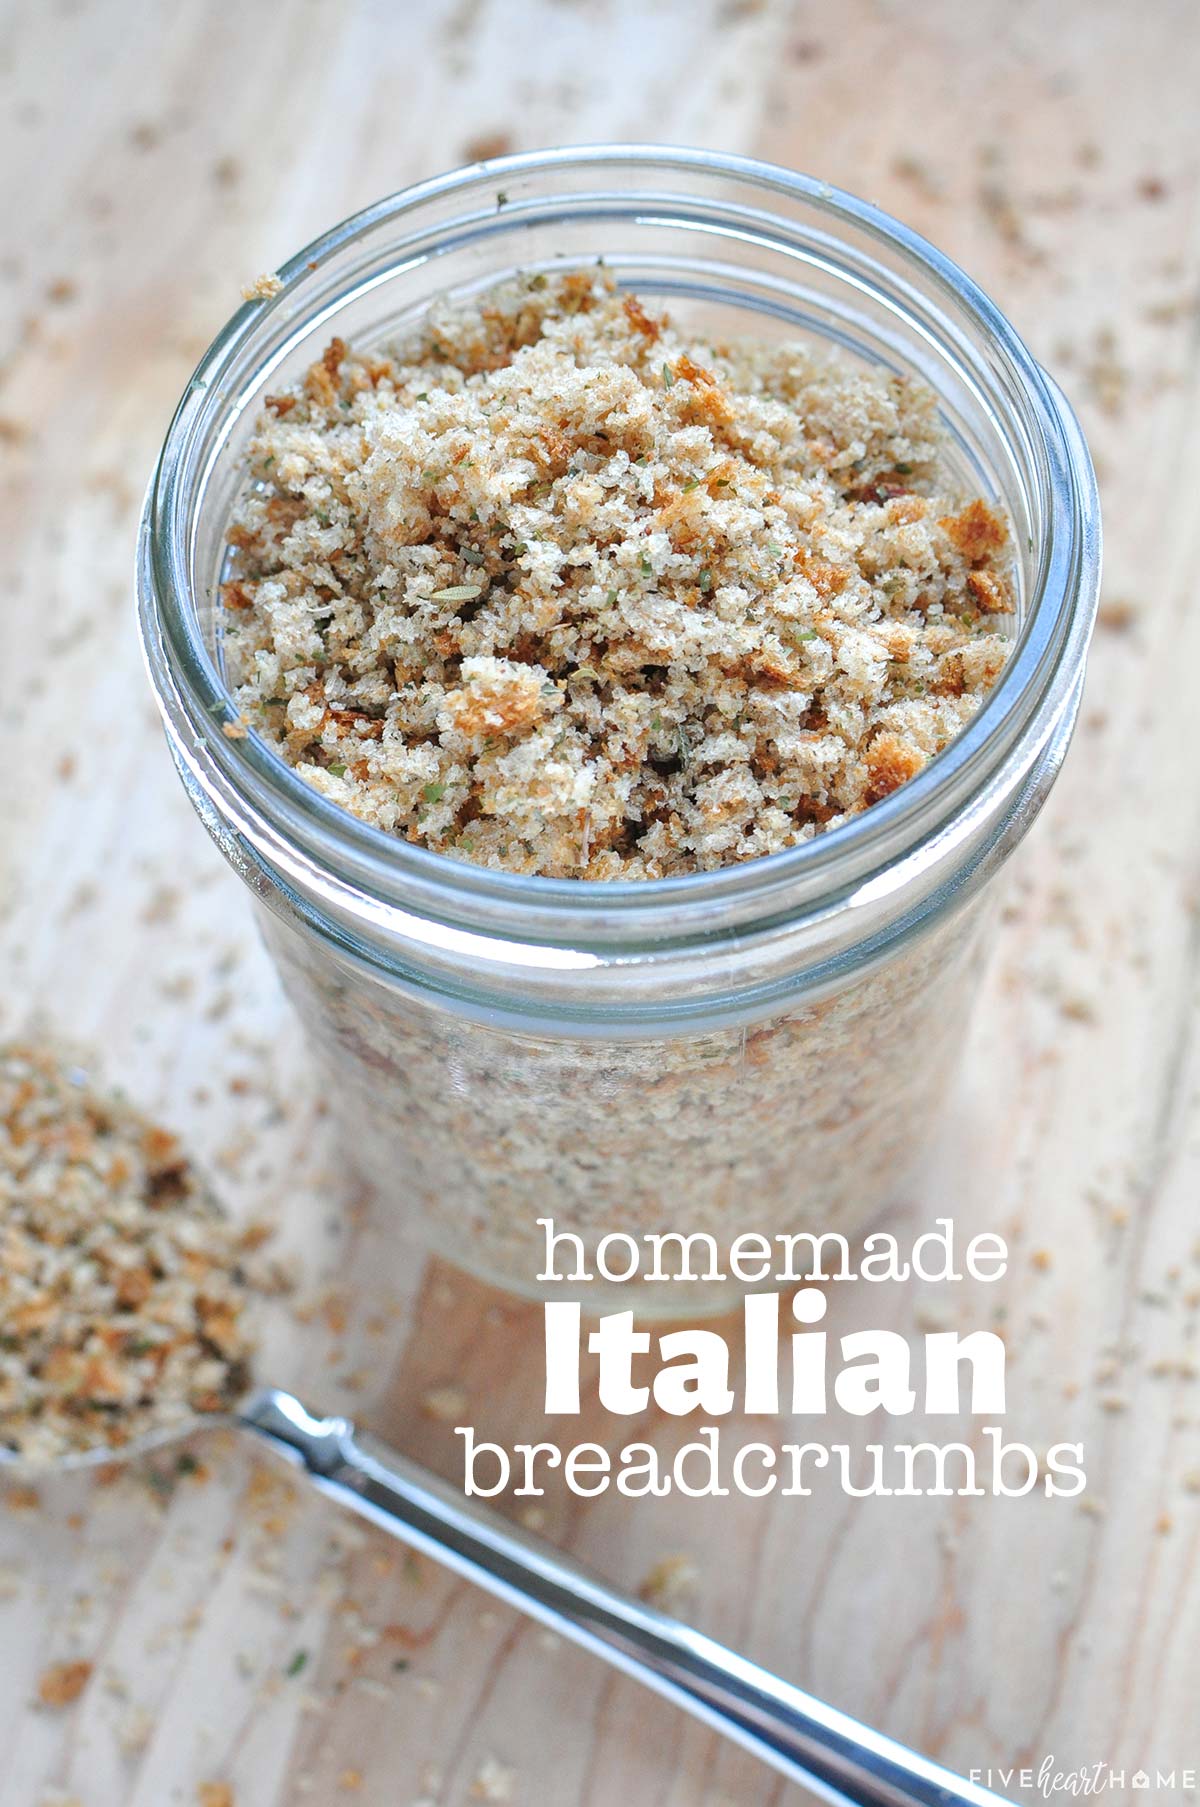 Homemade Italian Breadcrumbs are easy to make, economical, a great way to use up old bread, and YOU control the ingredients! Or leave out the herbs for plain seasoned breadcrumbs. | FiveHeartHome.com via @fivehearthome